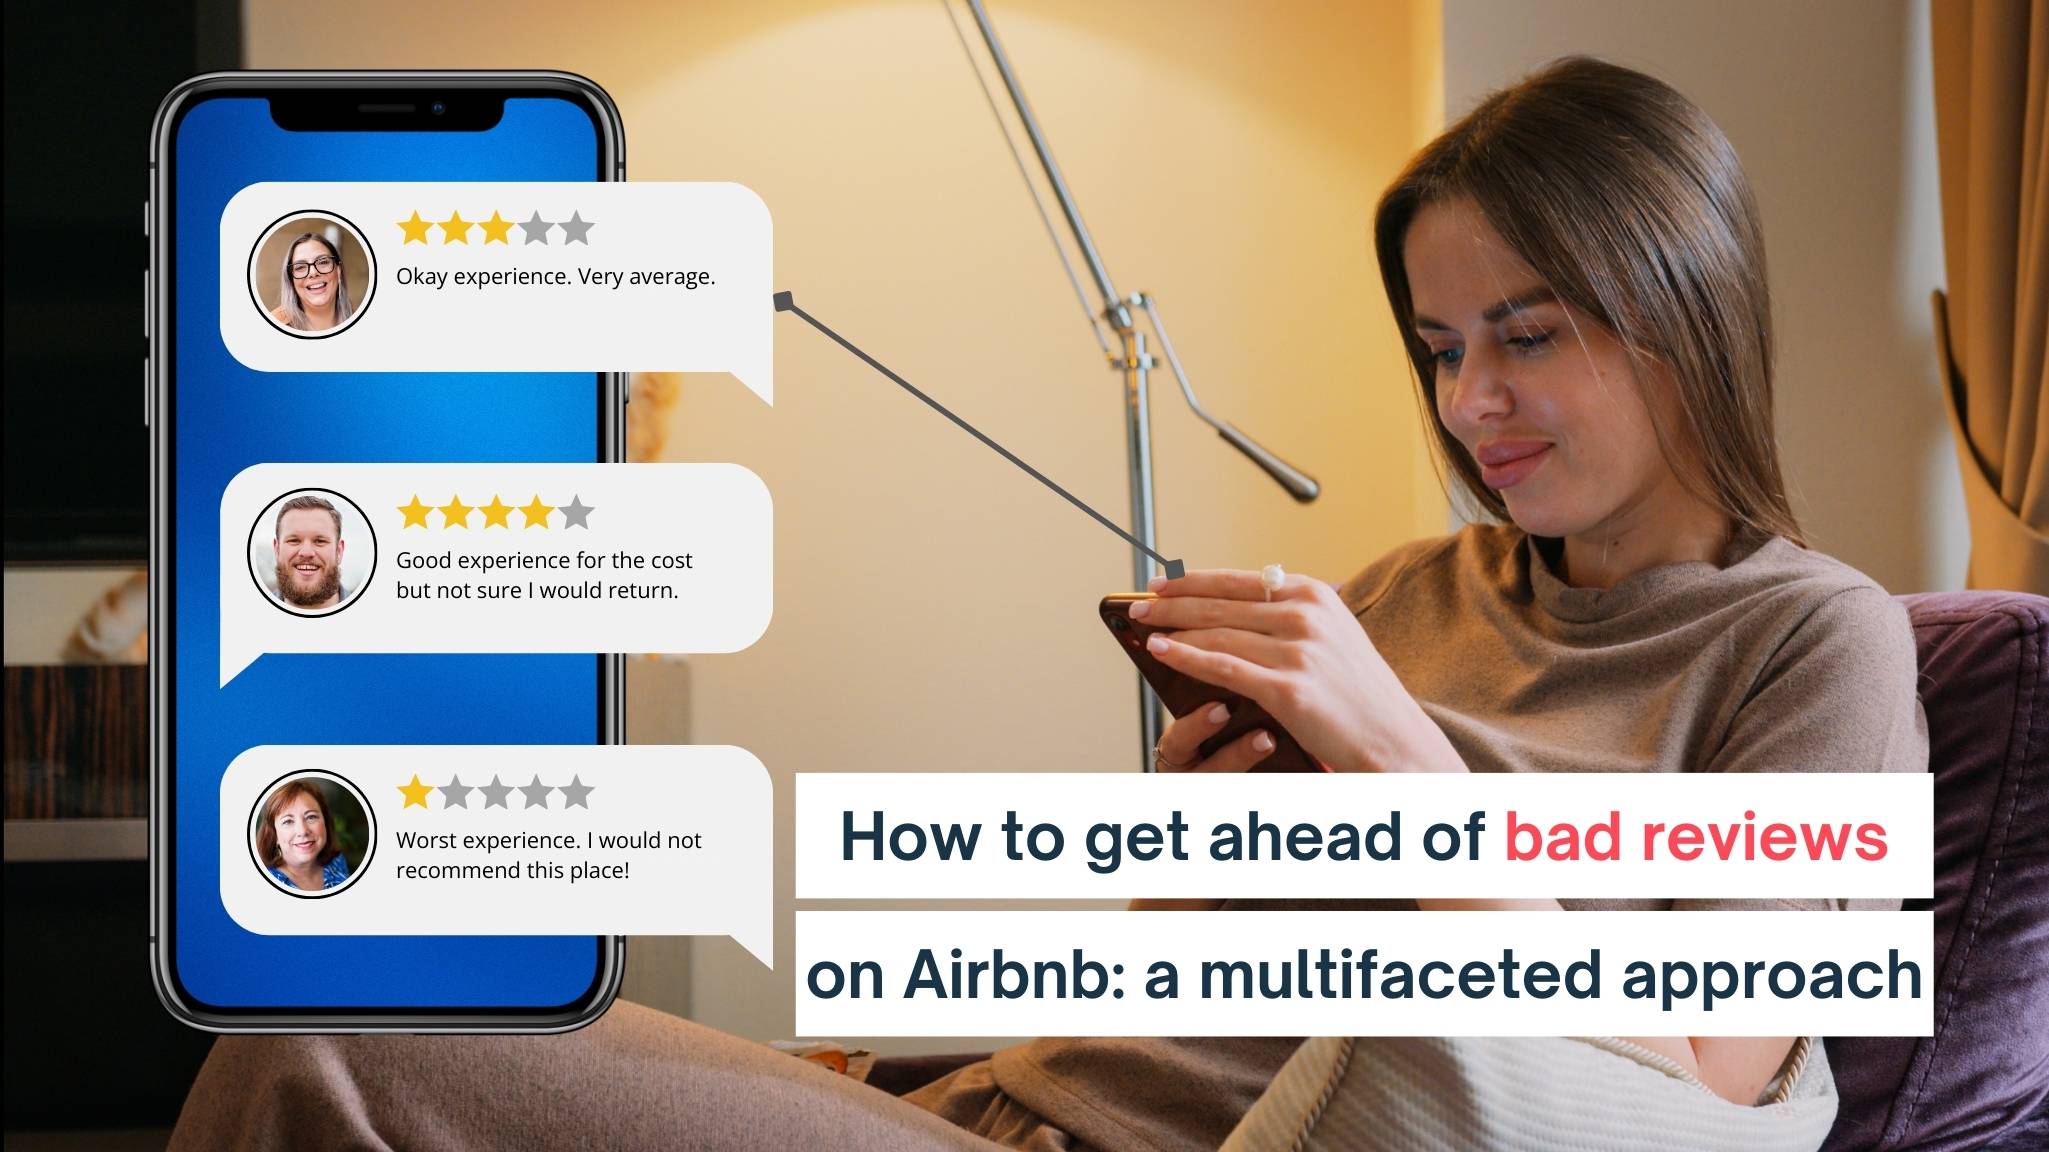 How to get ahead of bad reviews on Airbnb: a multifaceted approach